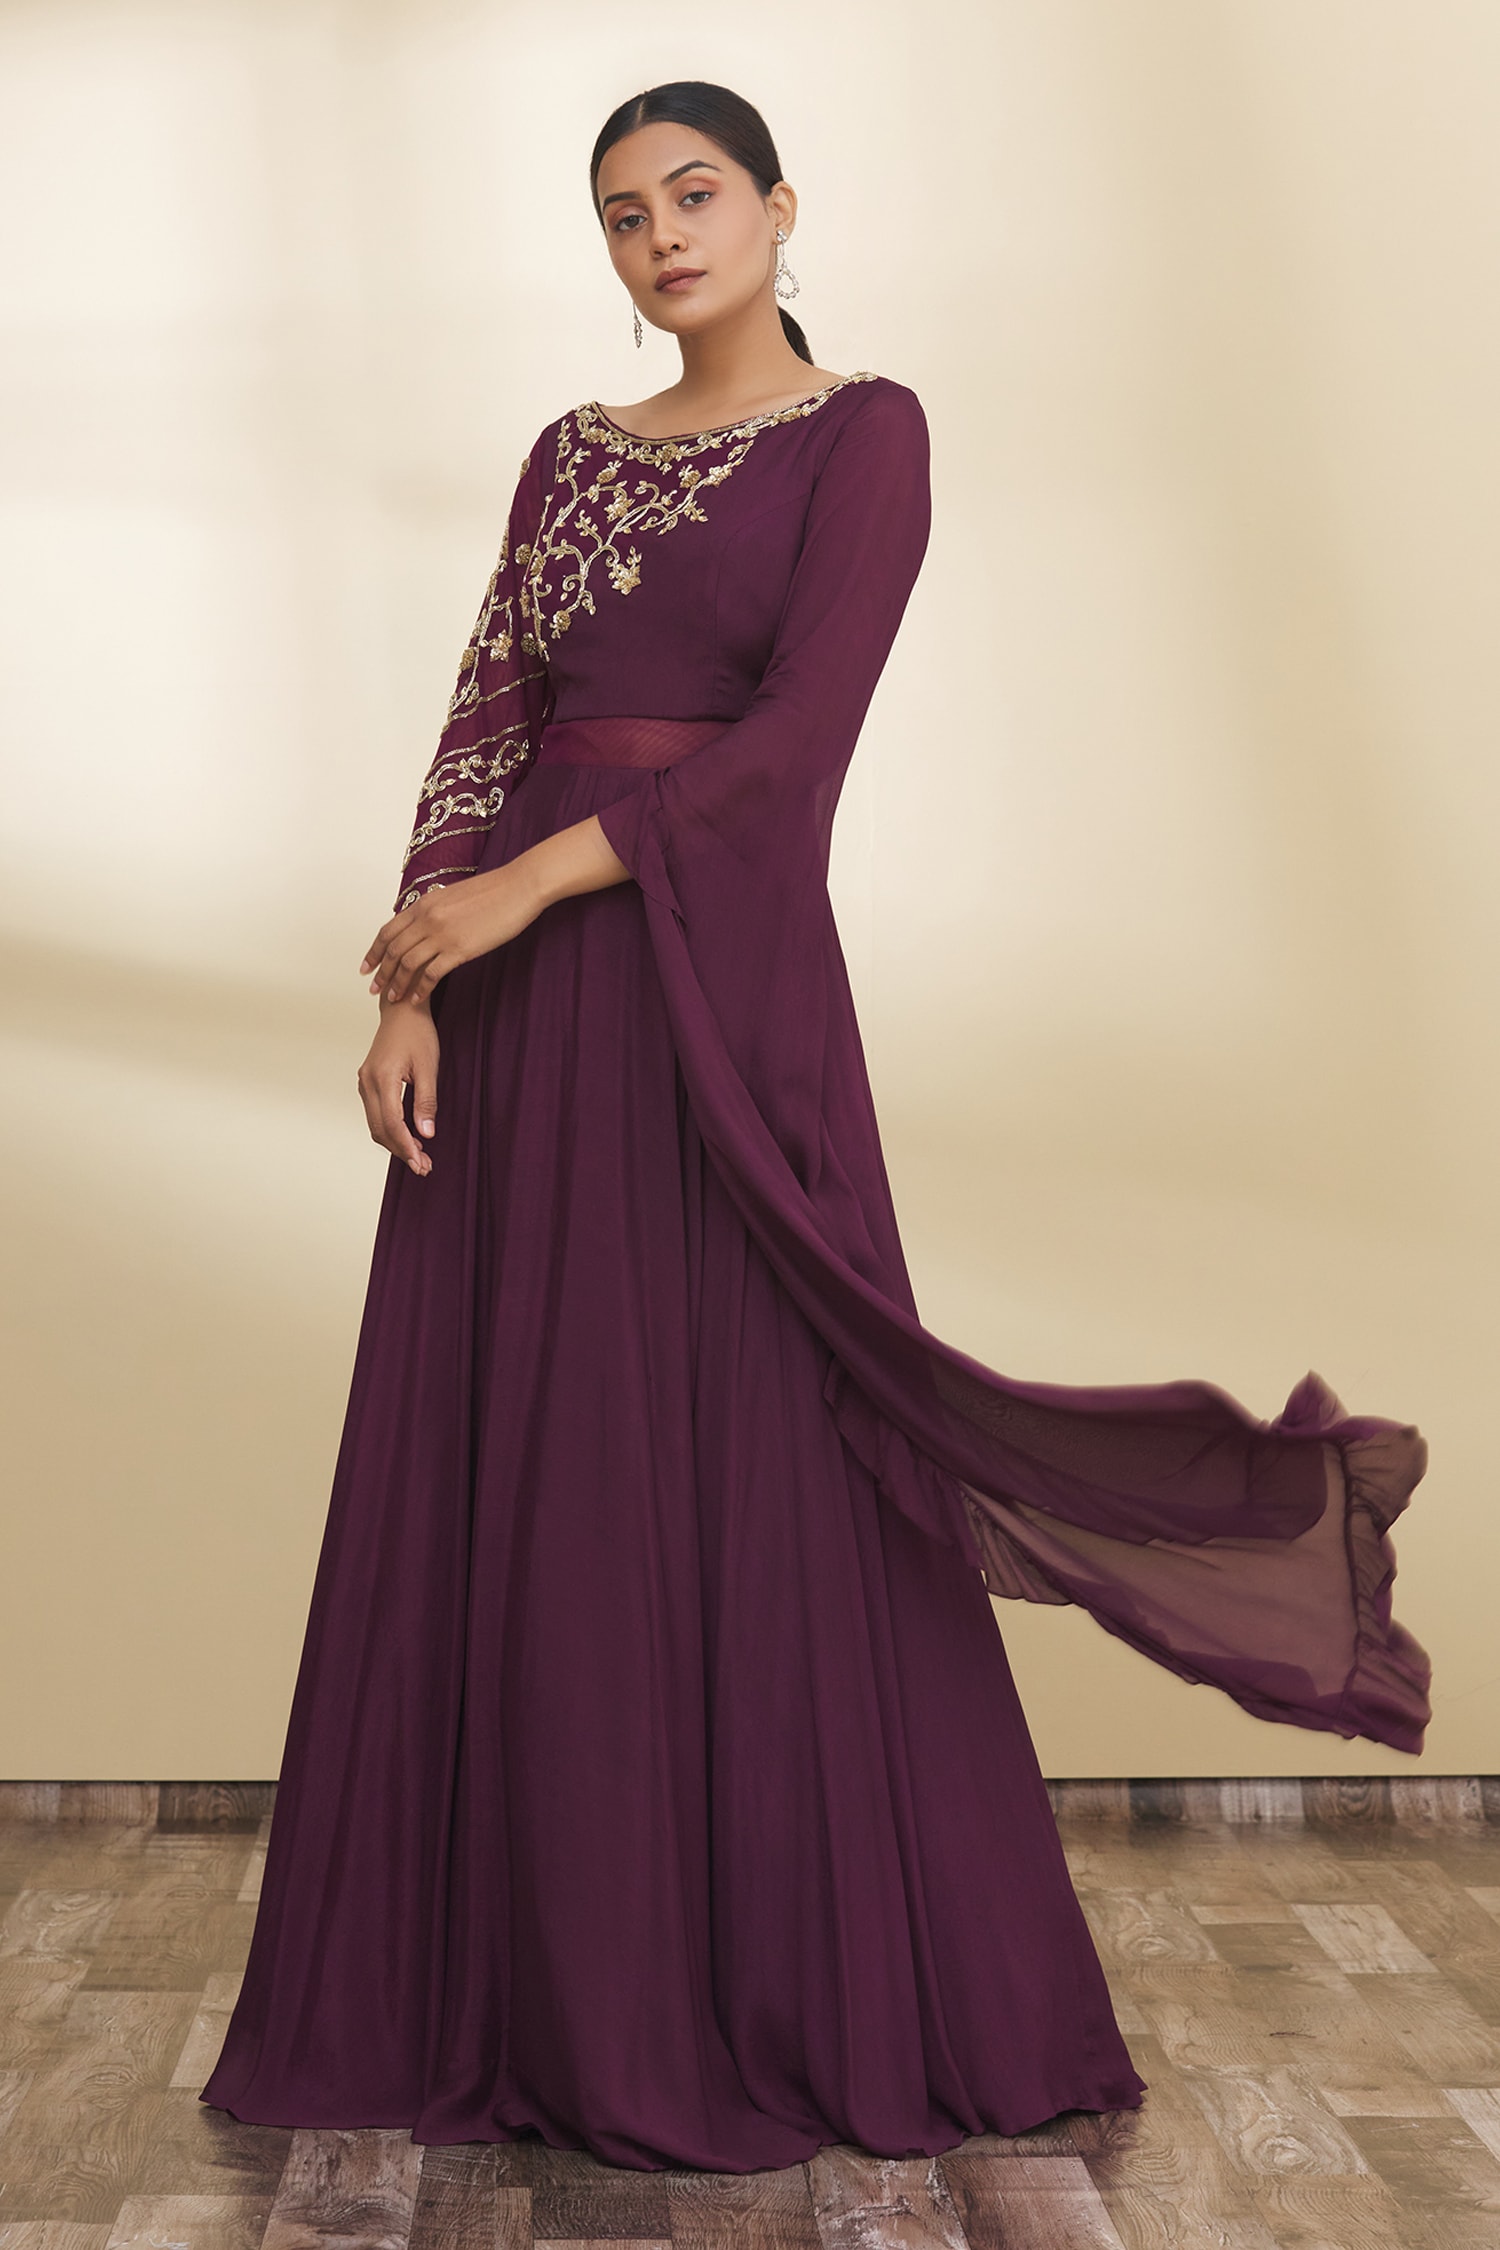 Khwaab by Sanjana Lakhani - Maroon Embroidery Round Gown